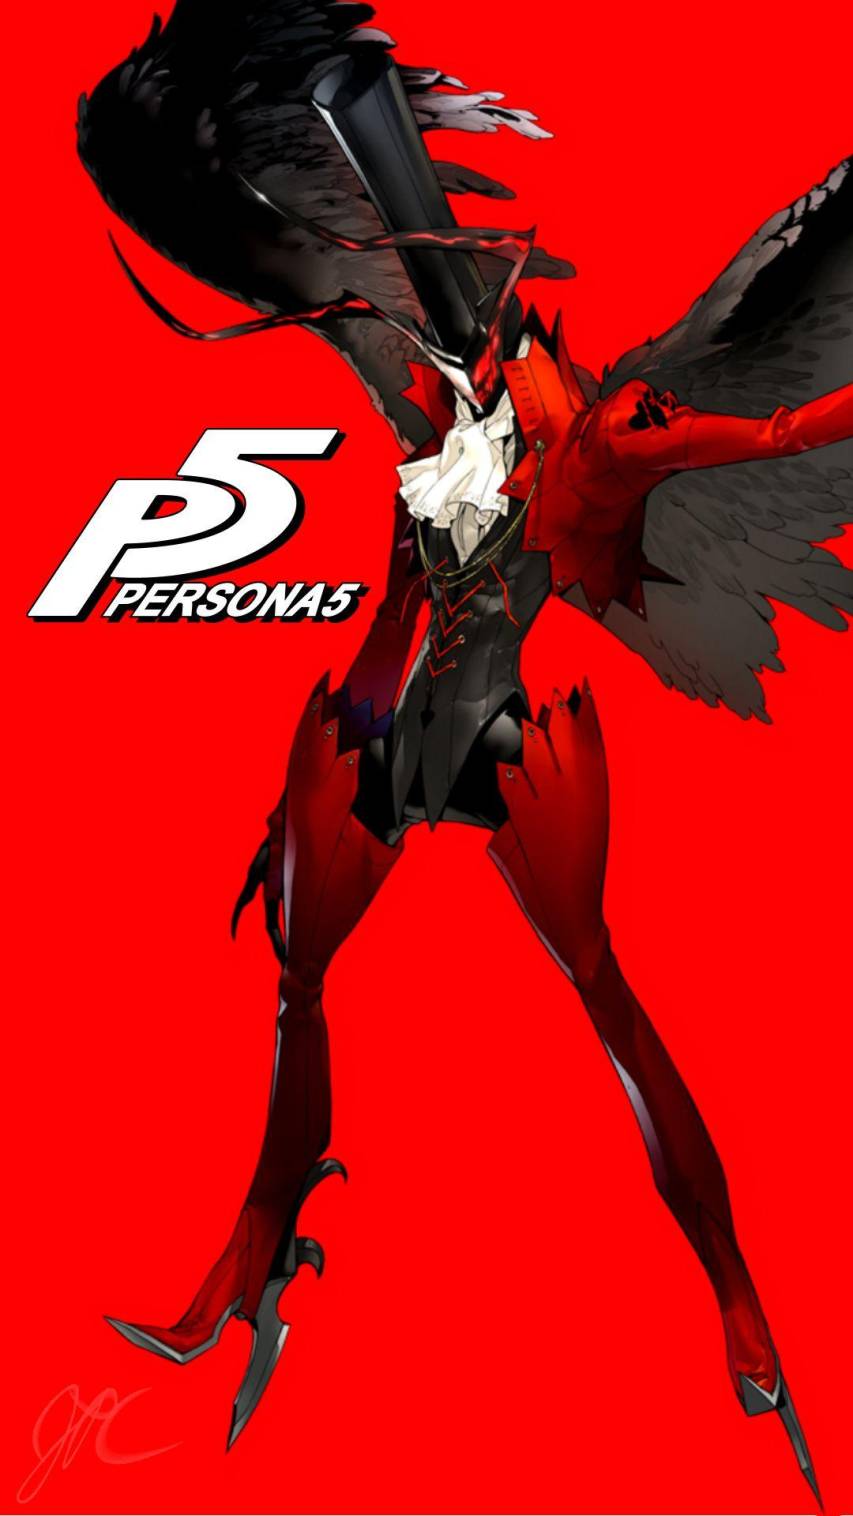 Persona 5 Phone Wallpaper, P5 iPhone Background